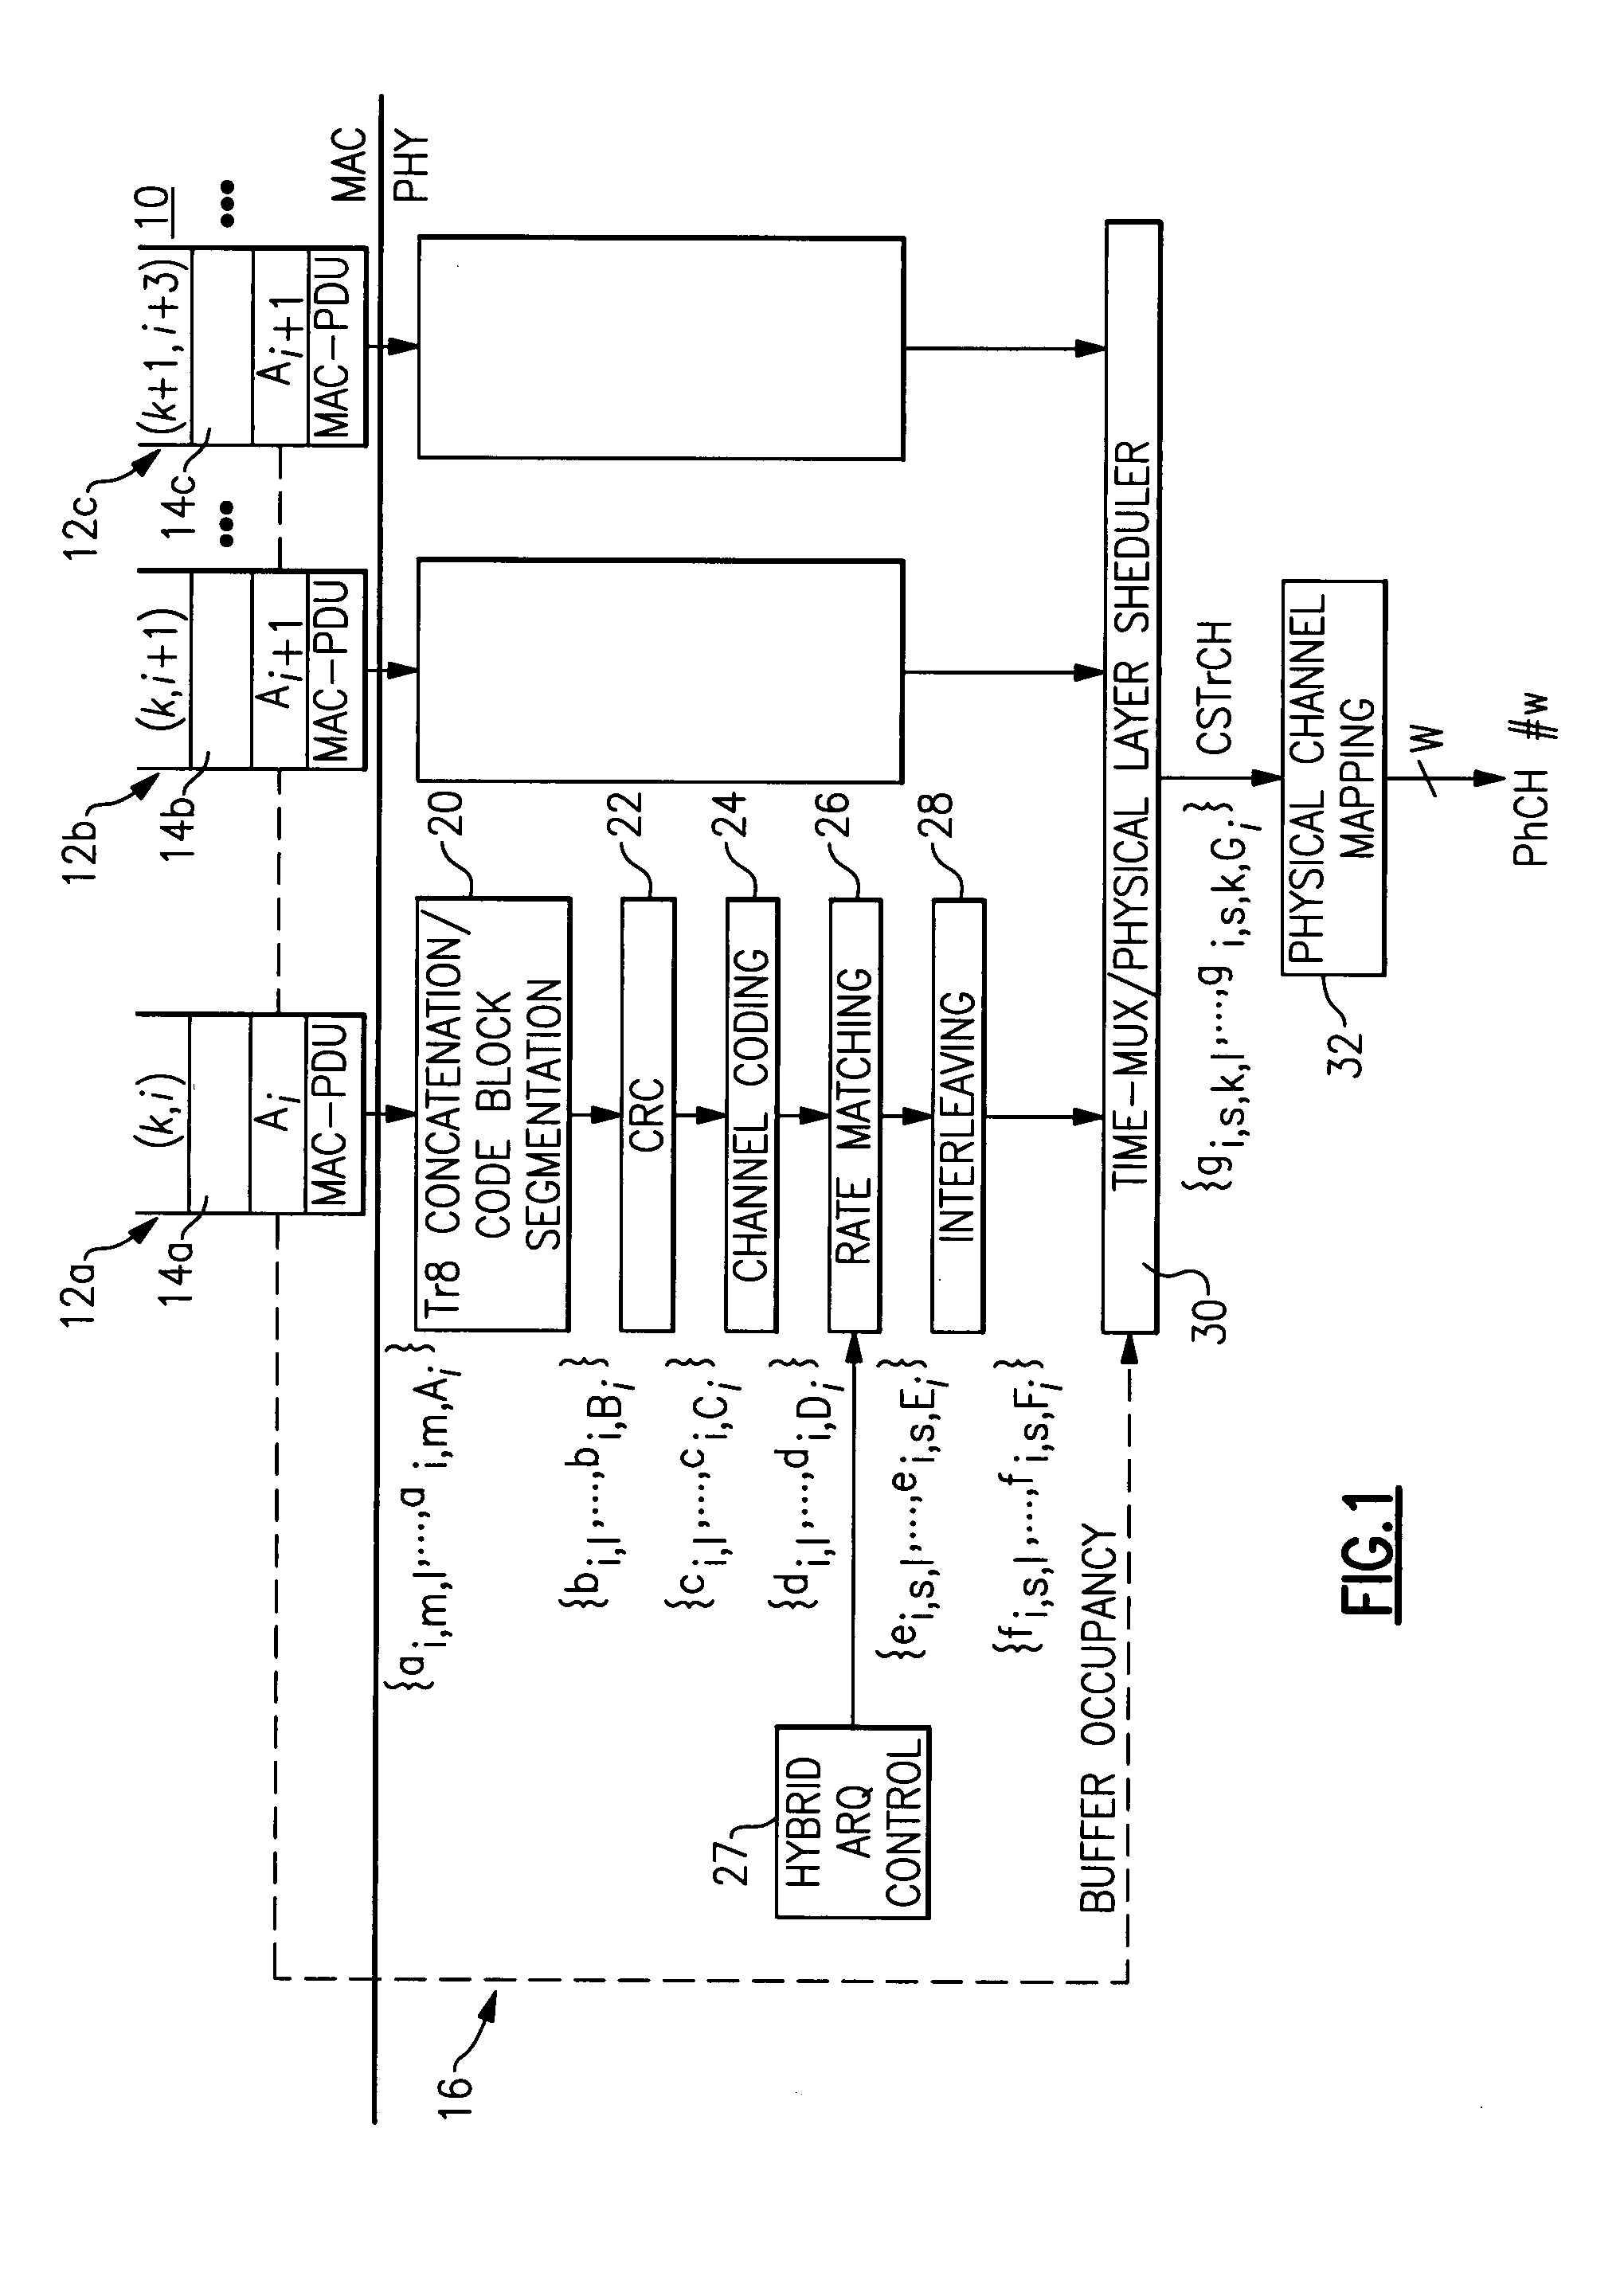 Transport channel multiplexing system and method